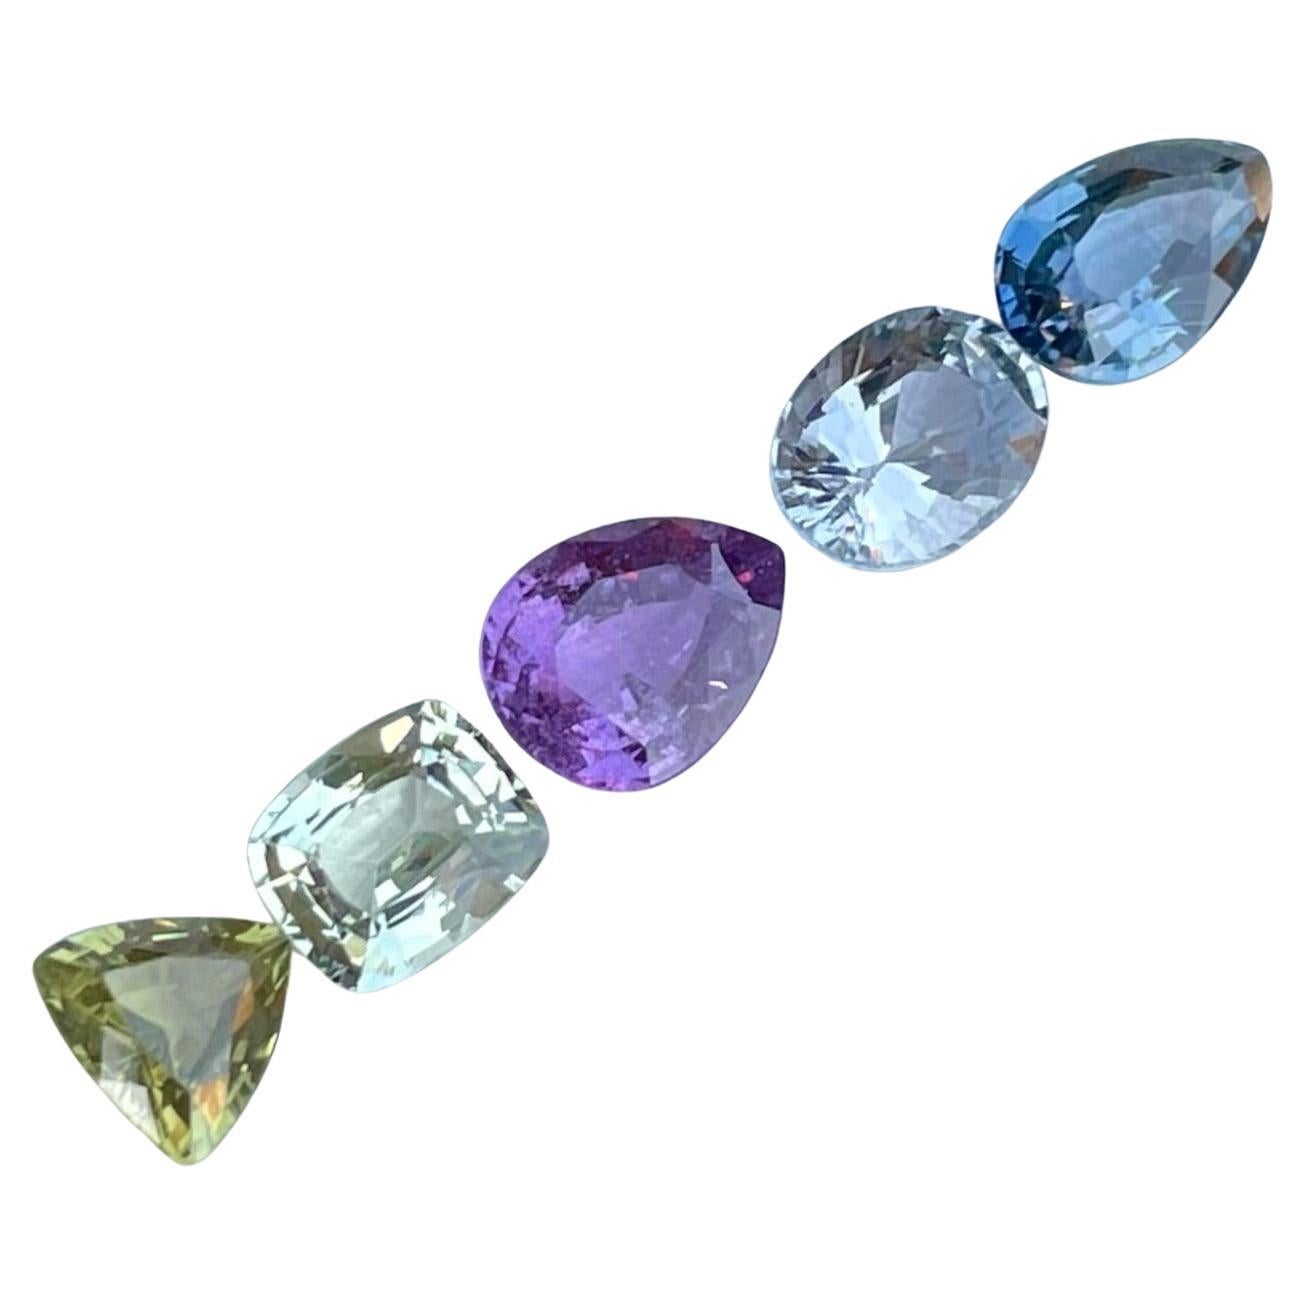 6.04 carats Colorful Stones Loose Sapphire Lot Natural Gemstones From Sri Lanka For Sale